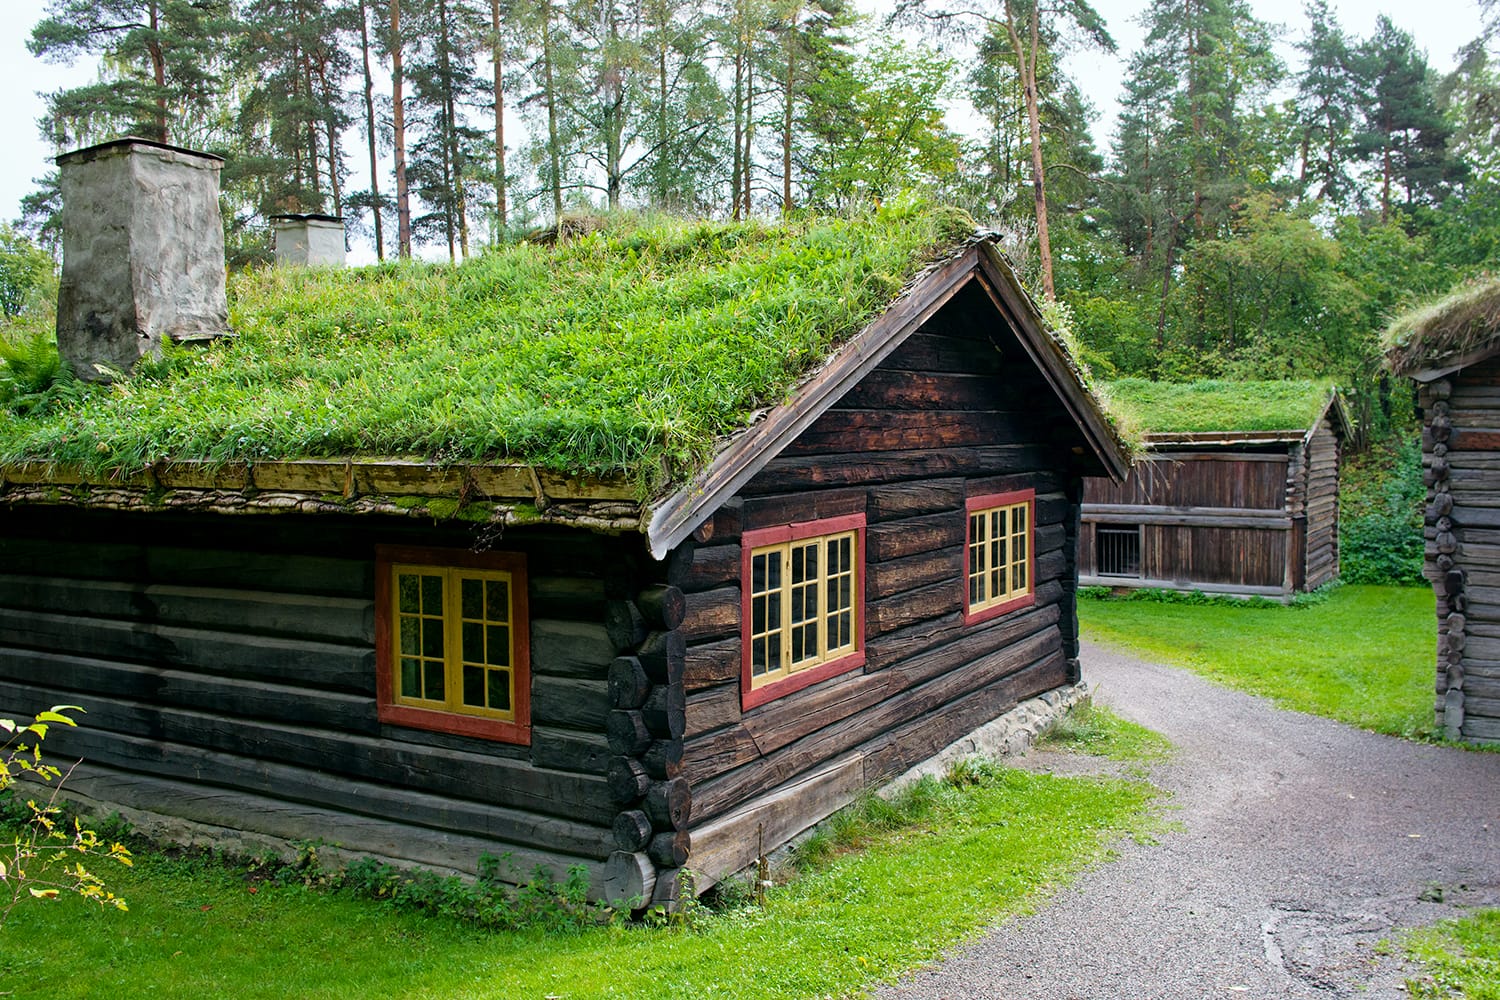 Traditional Norwegian House with grass roof. The Norwegian Museum of Cultural History, Oslo.